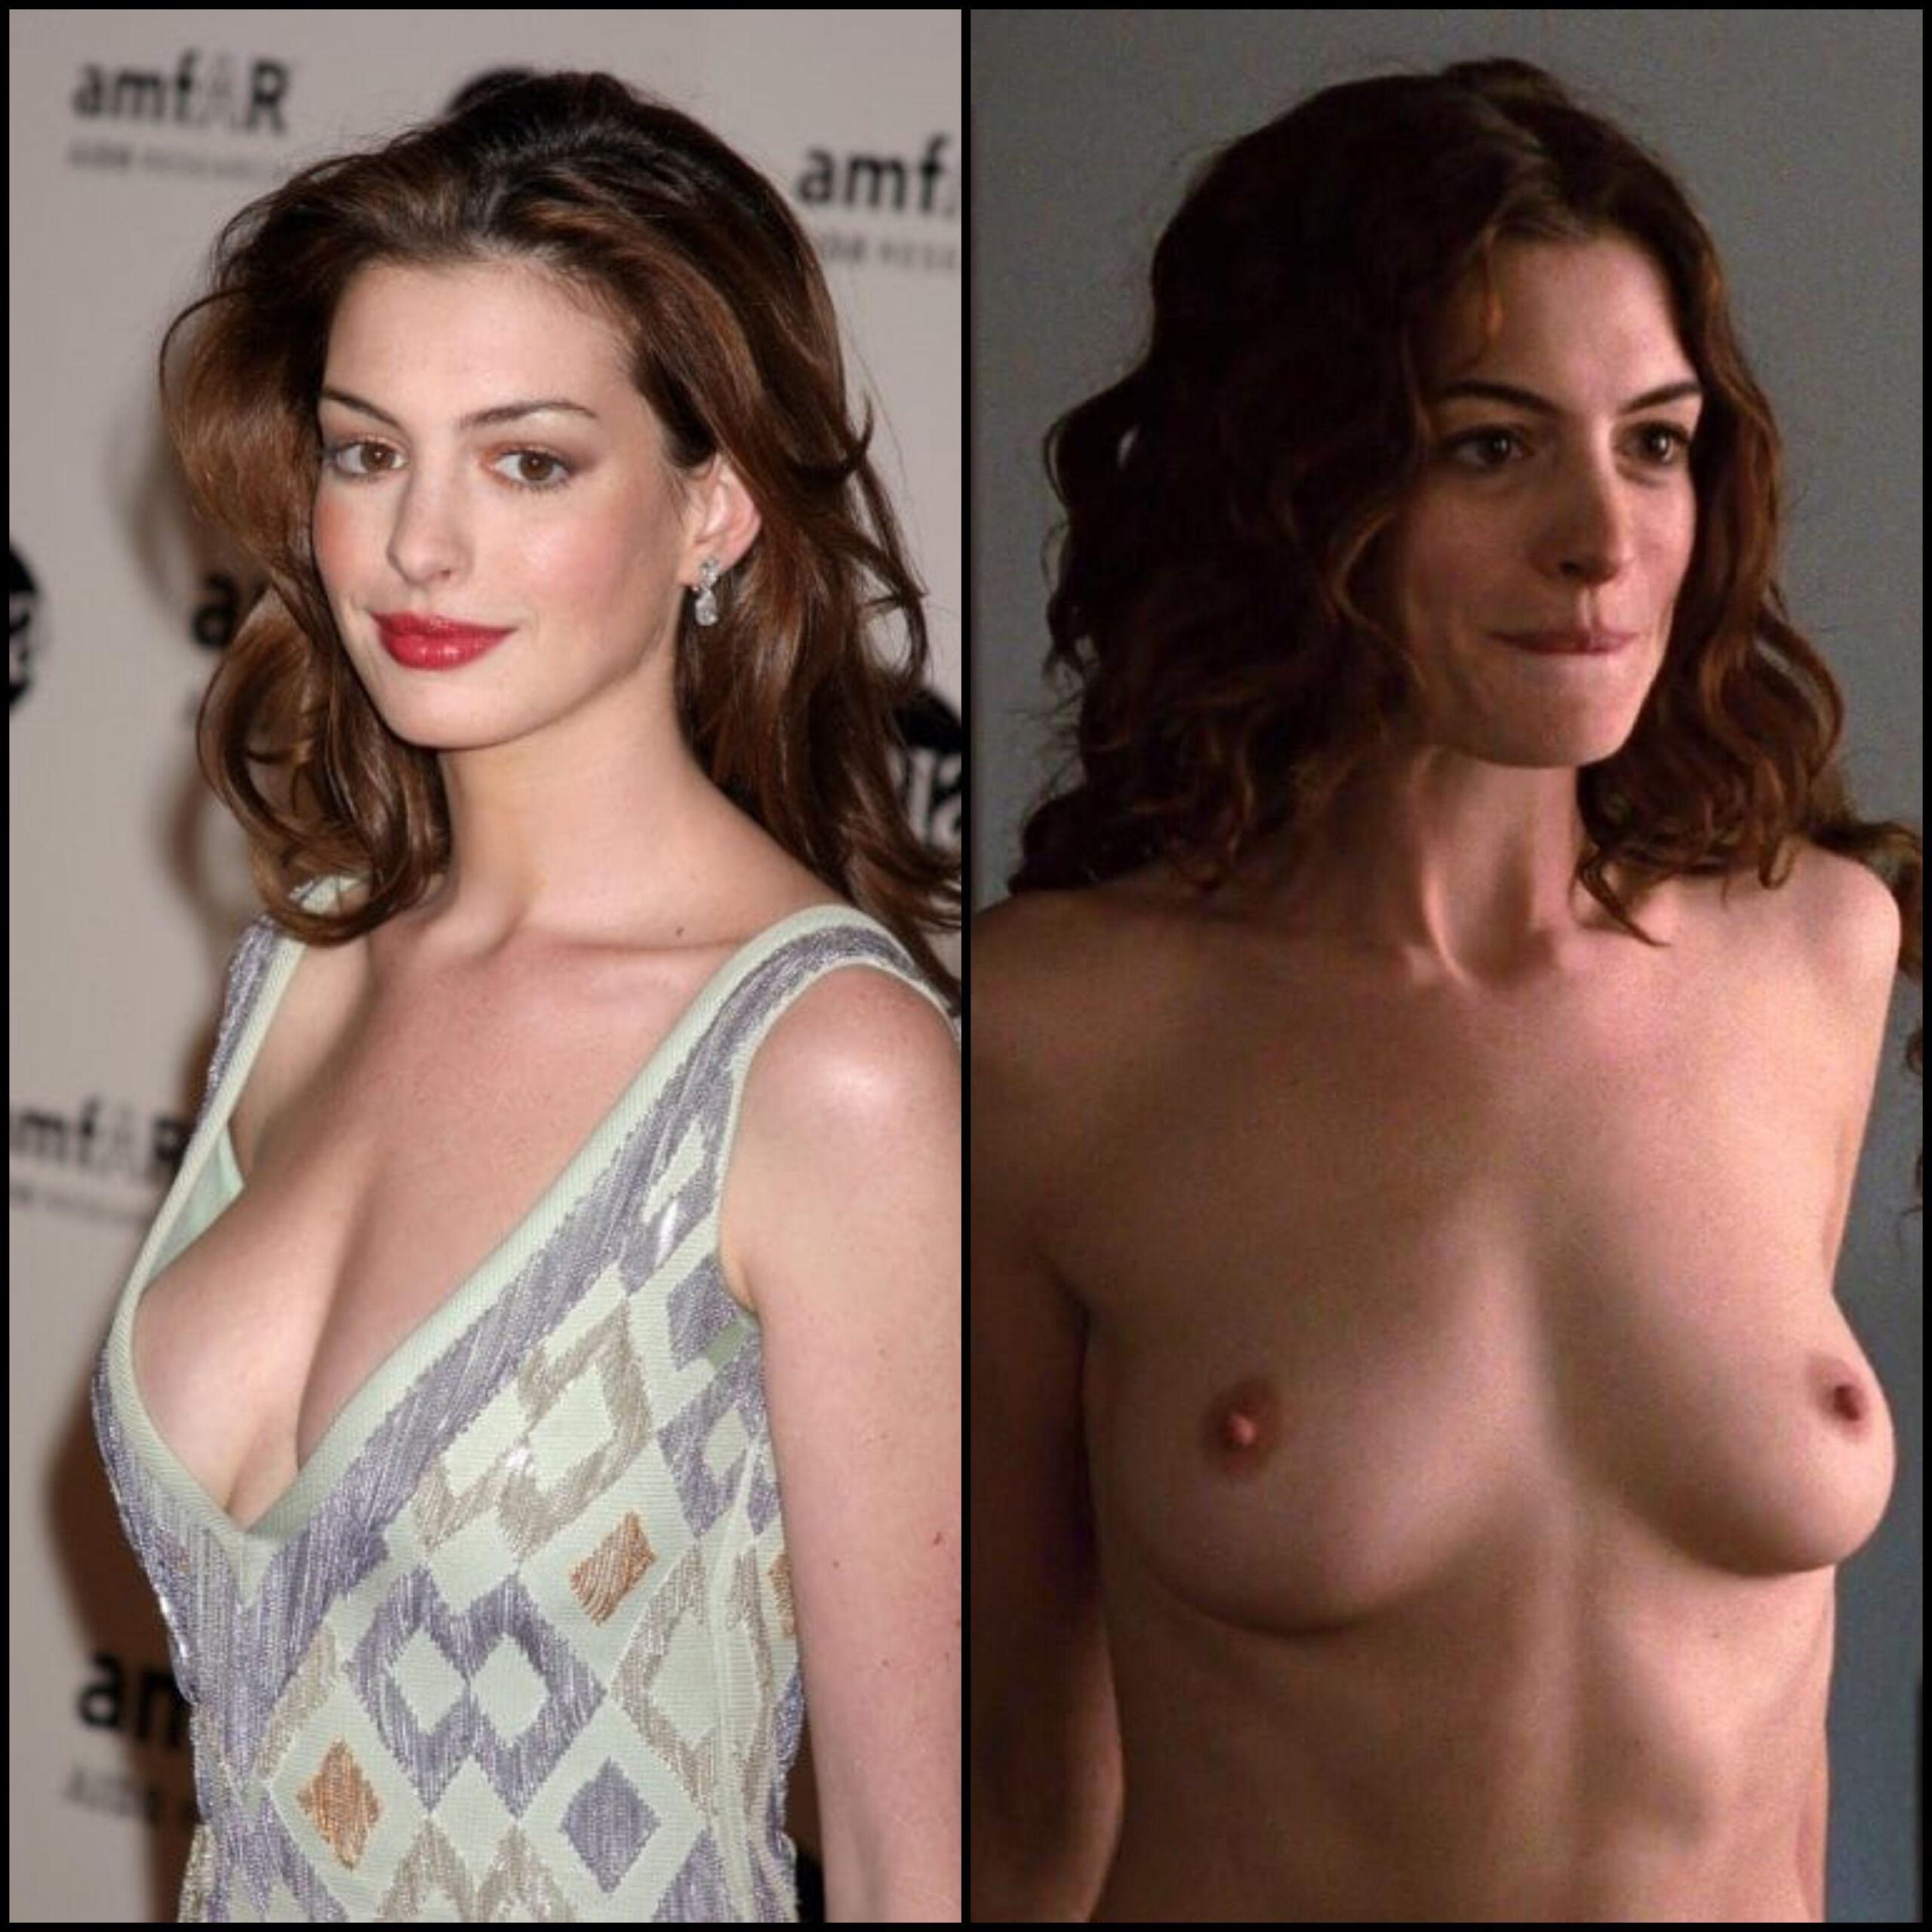 Anne Hathaway on/off